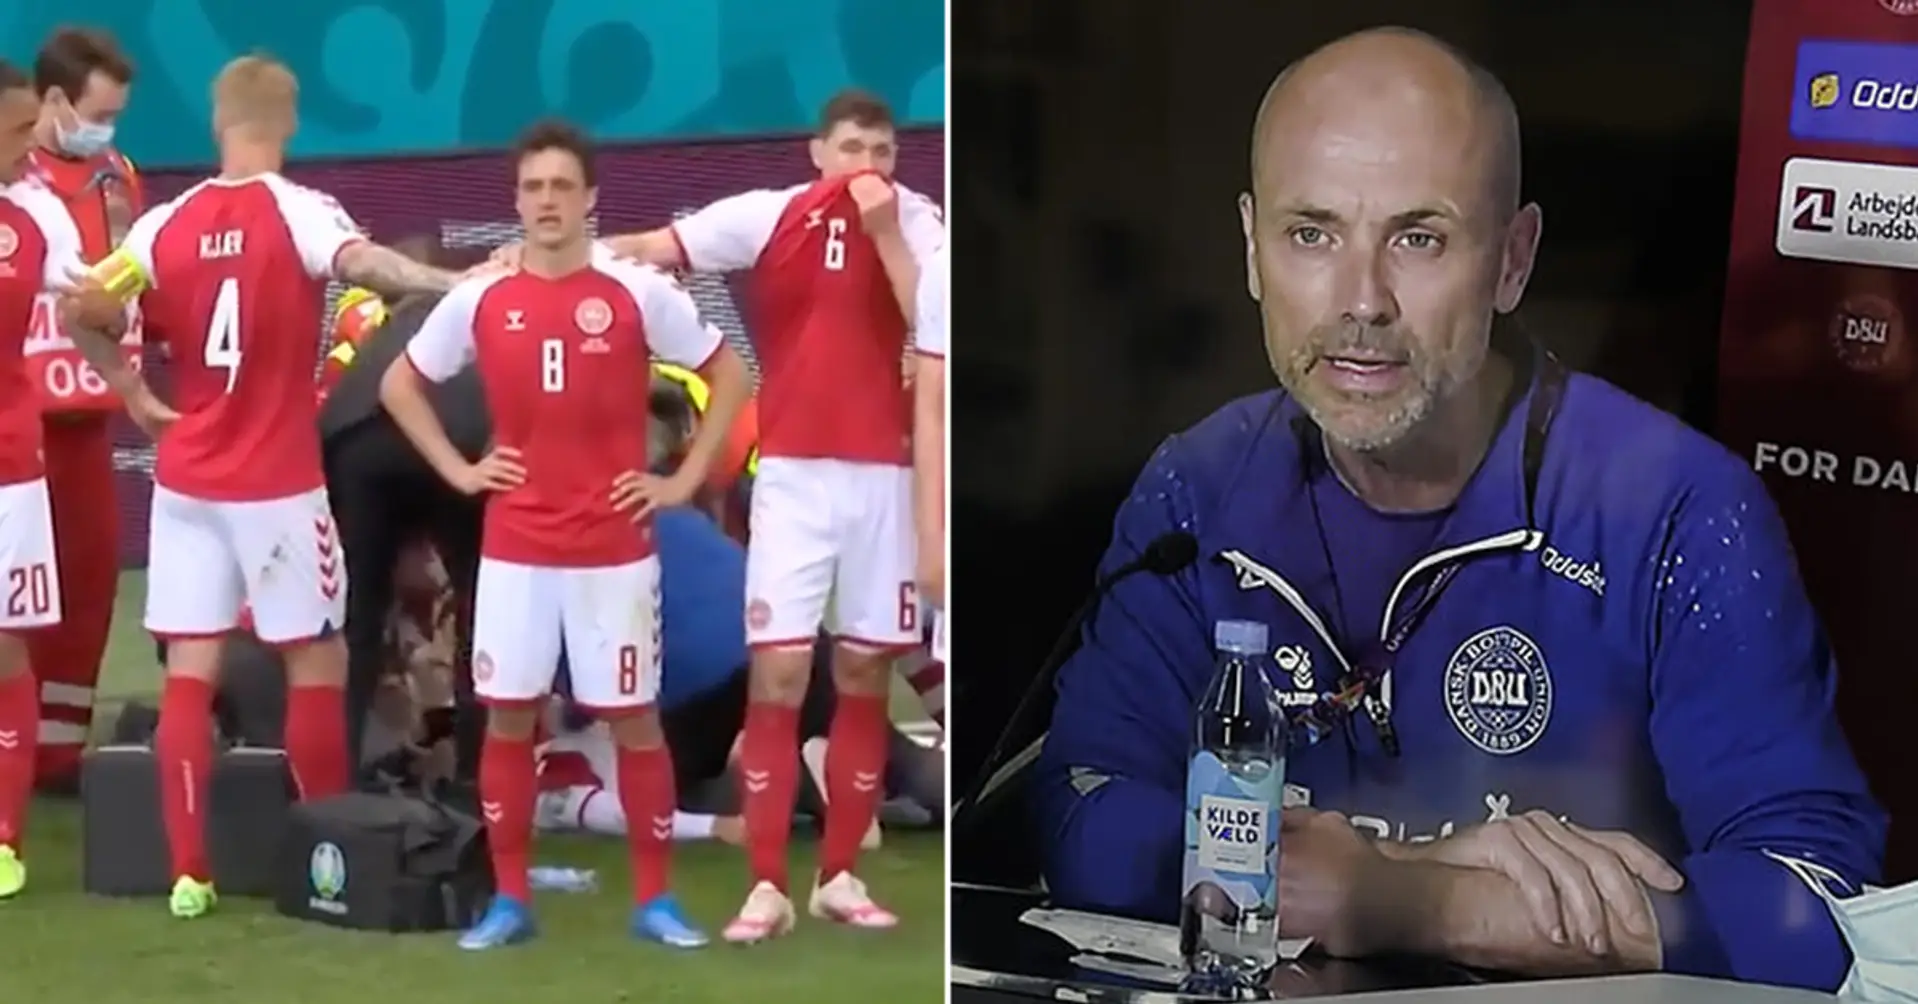 Denmark’s team doctor on how they saved Eriksen's life: ‘He was gone. But we got him back’